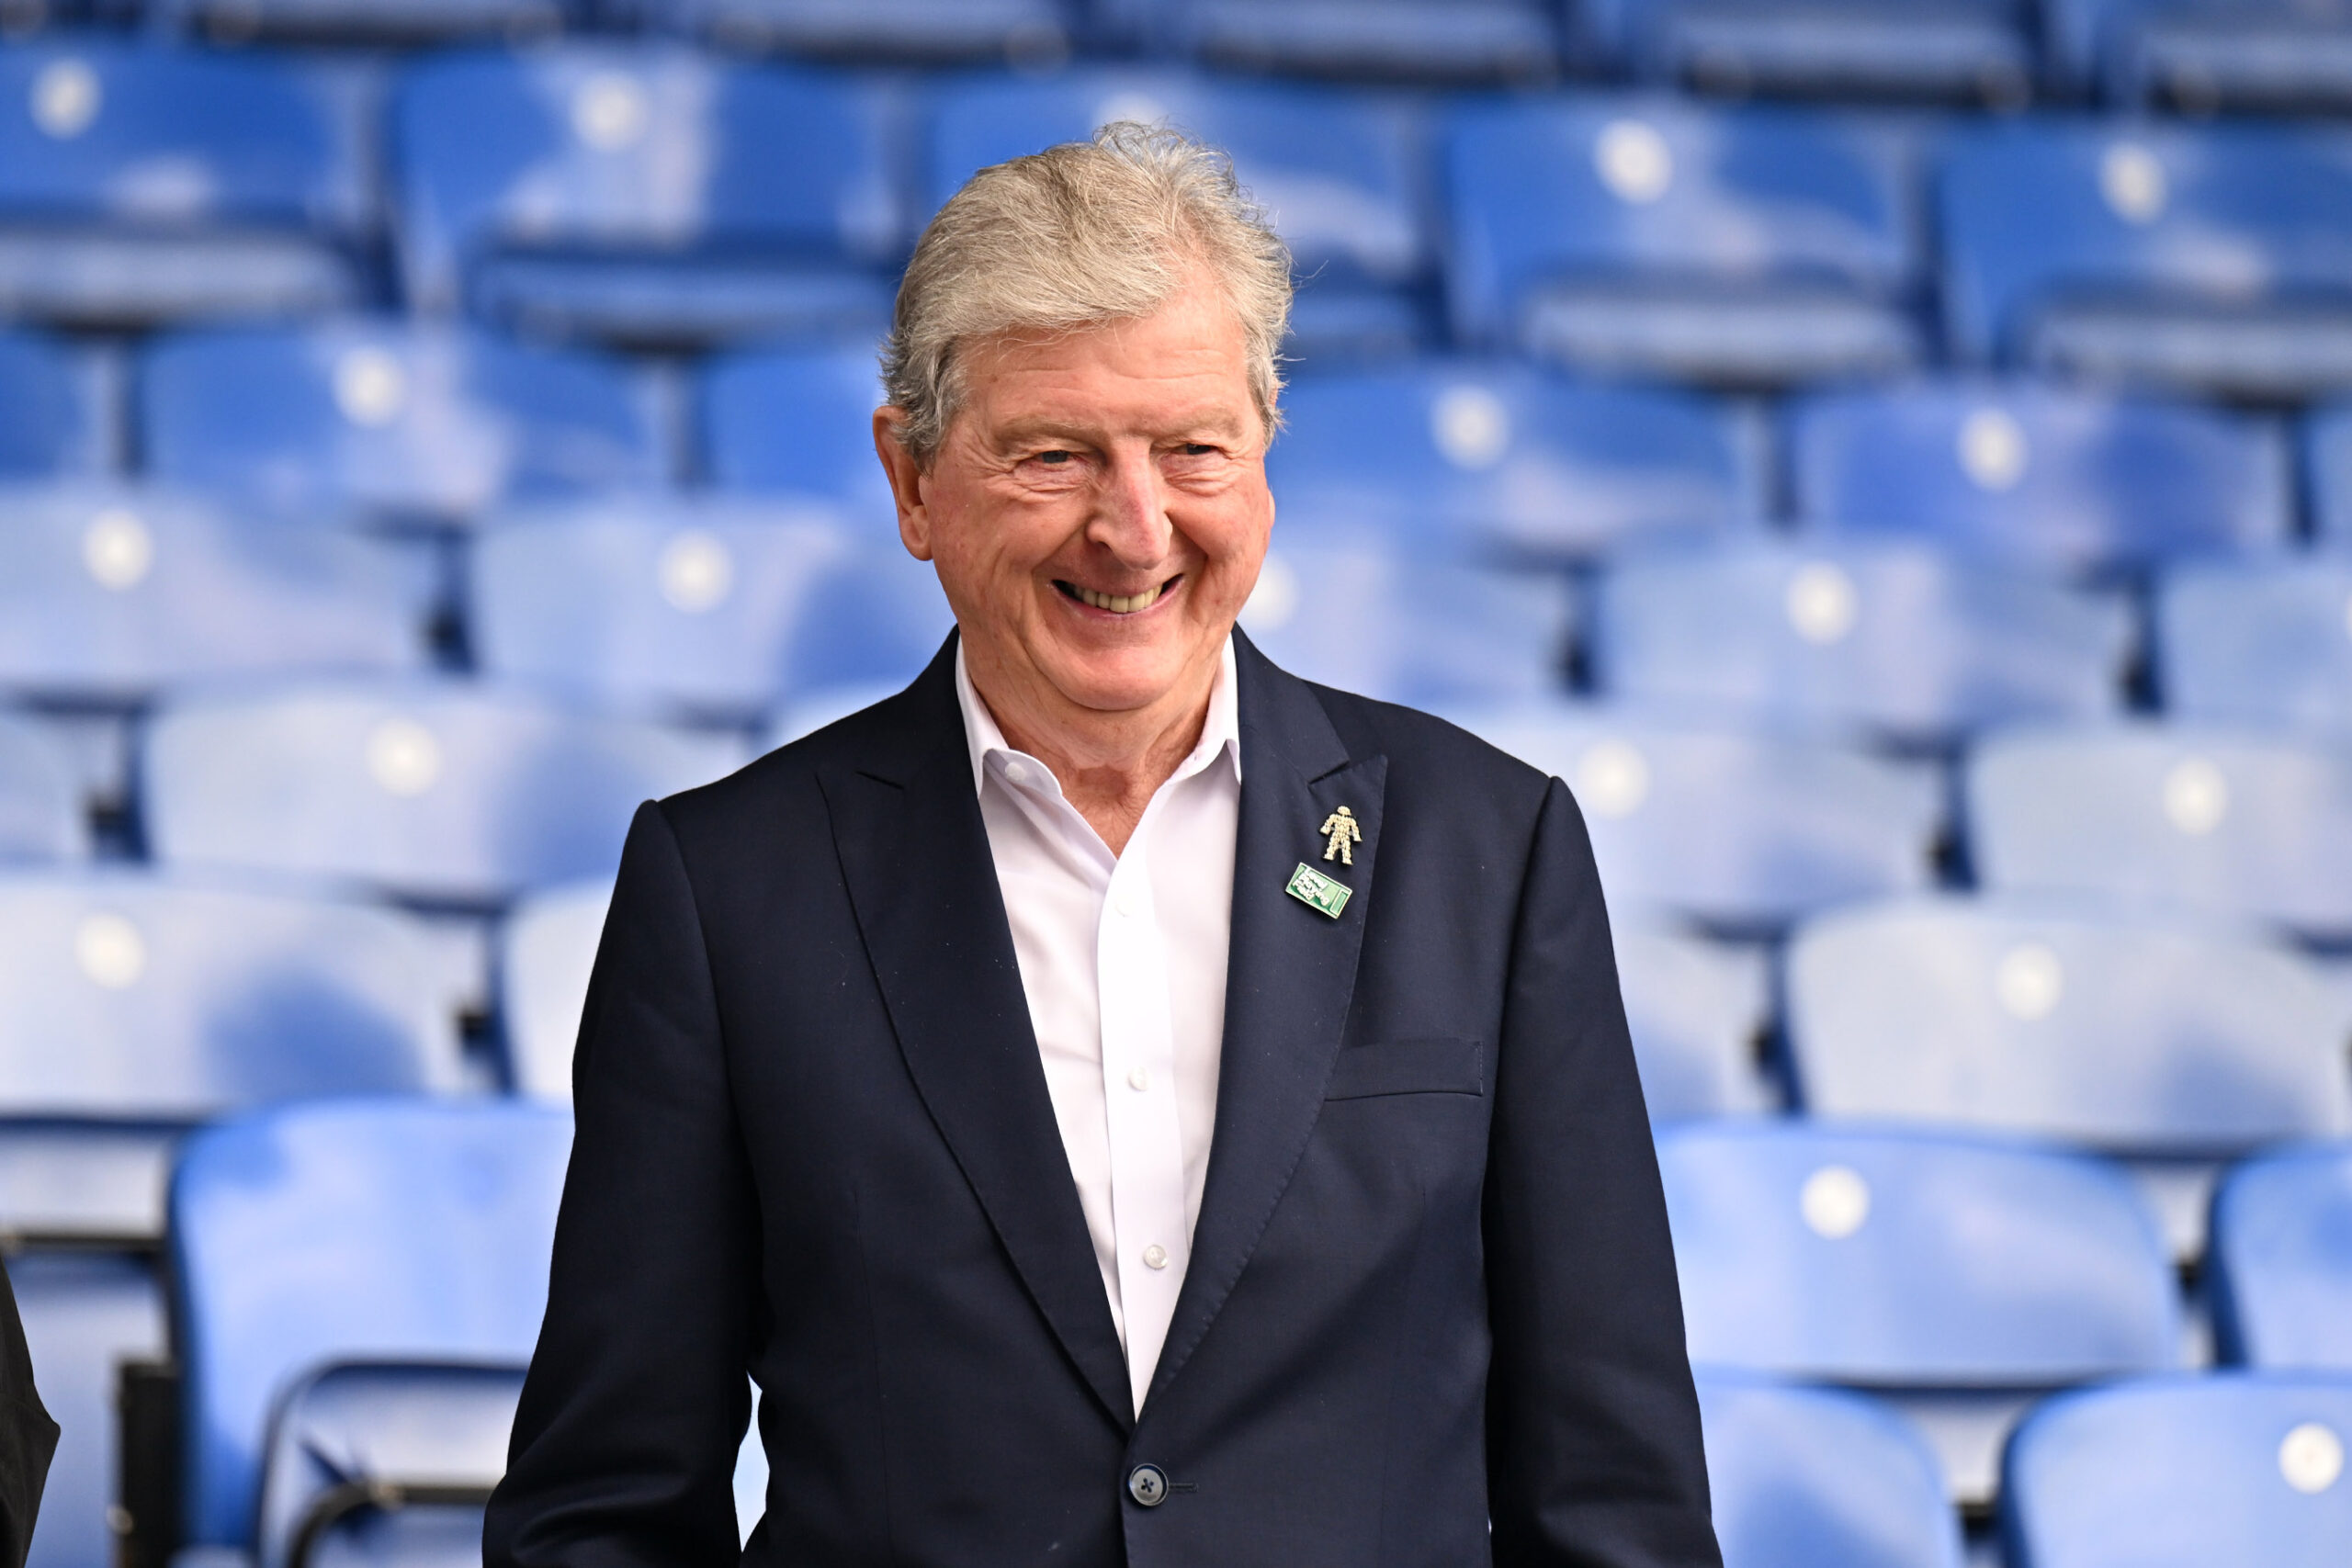 ‘They’ve given me a boost’ – Roy Hodgson reflects on Crystal Palace return